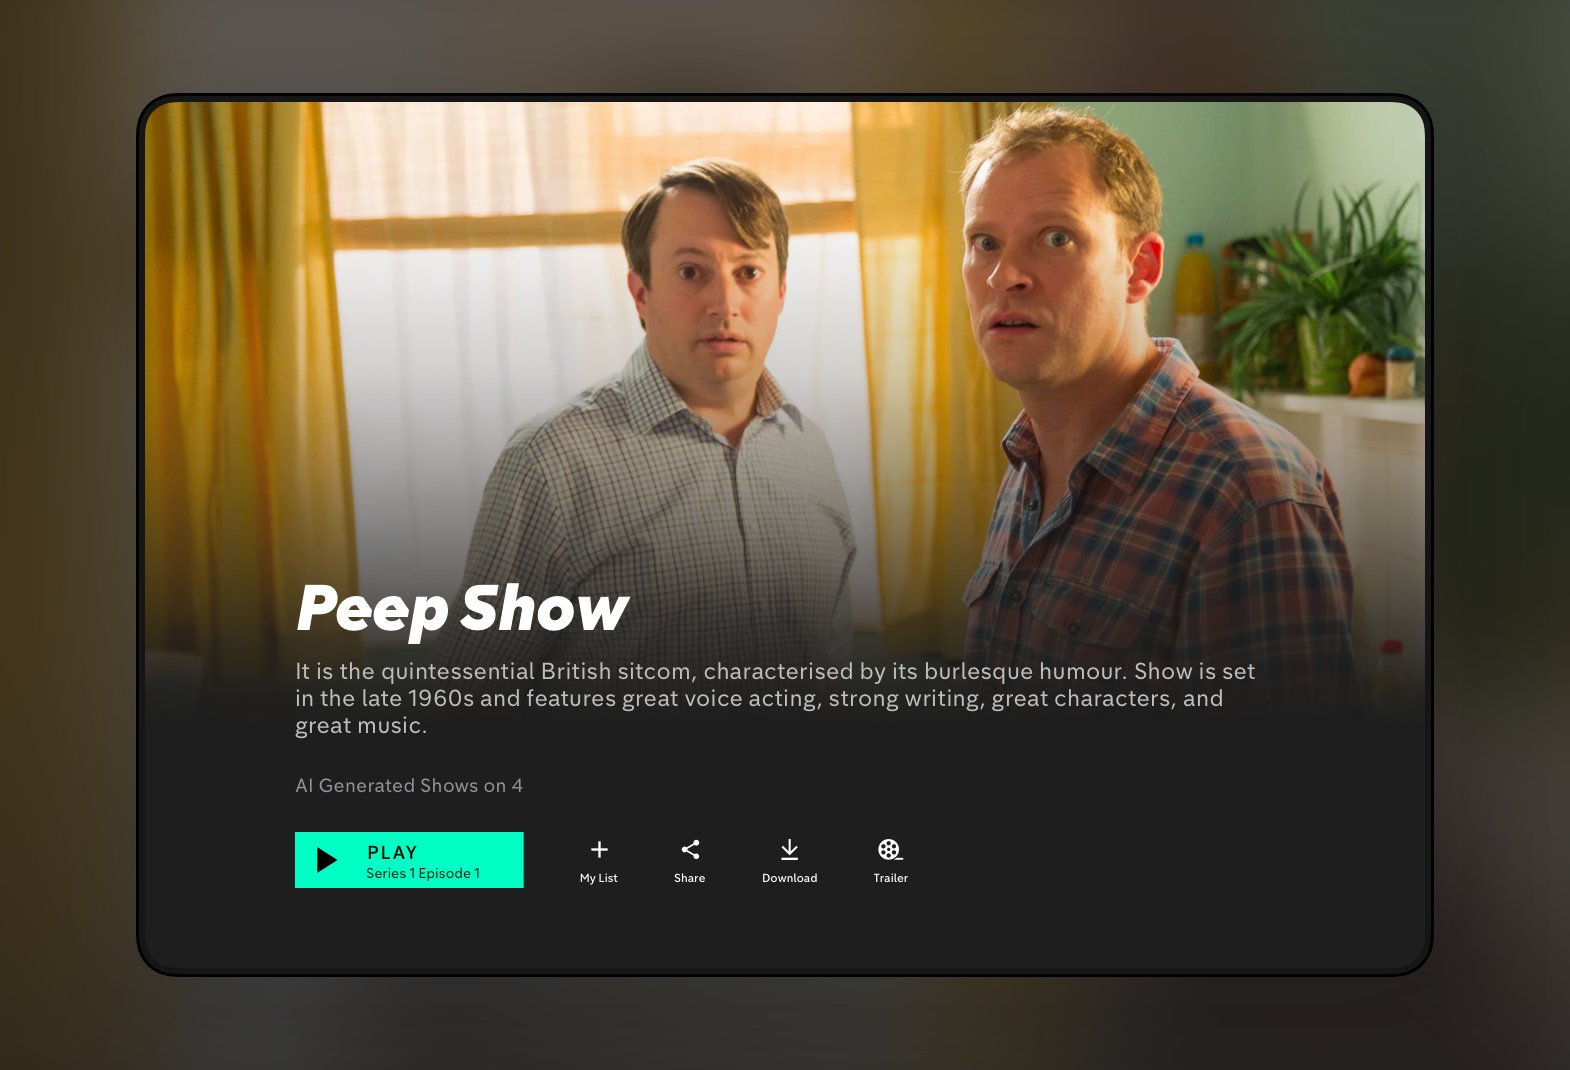 Peep Show. It is the quintessential British sitcom, characterised by its burlesque humour. Show is set in the late 1960s and features great voice acting, strong writing, great characters, and great music.